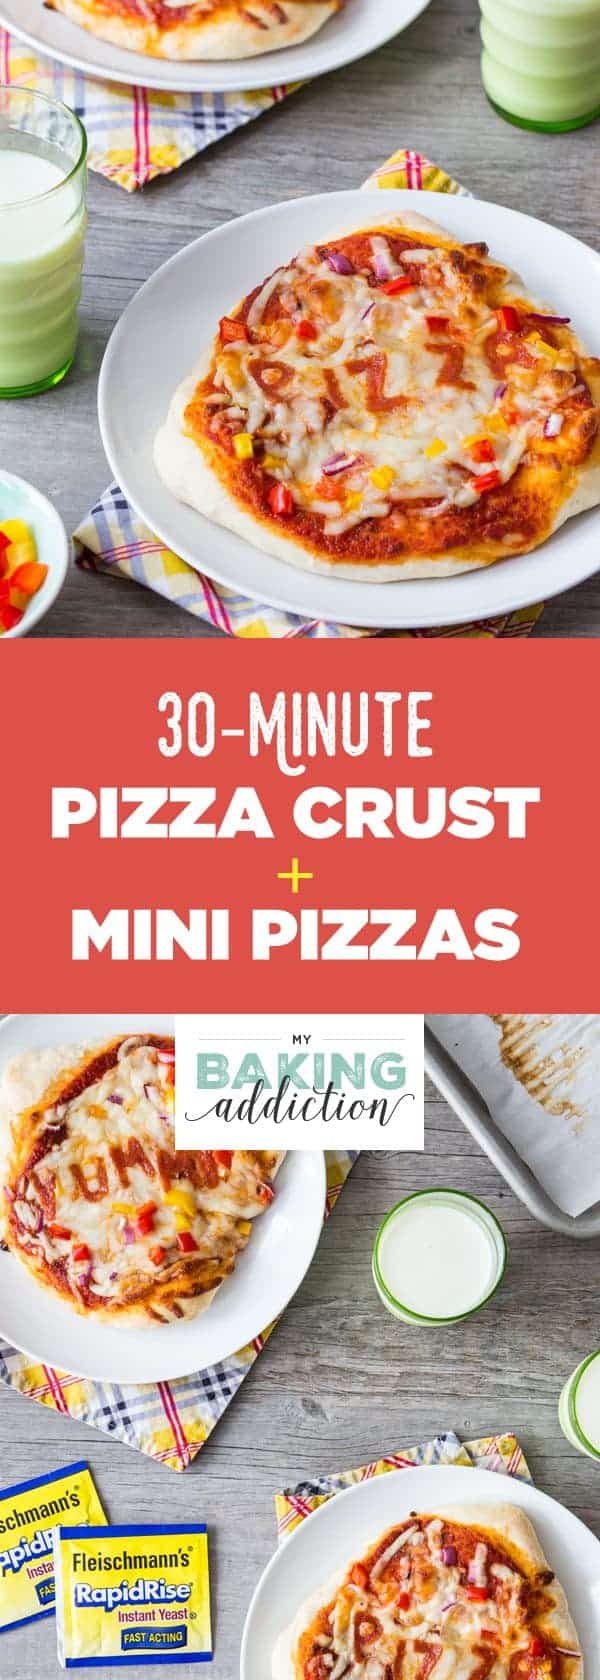 30 Minute Pizza Crust is quick and simple because there is no need for rising time. Divide the dough into mini crusts so everyone can create their own mini pizza!